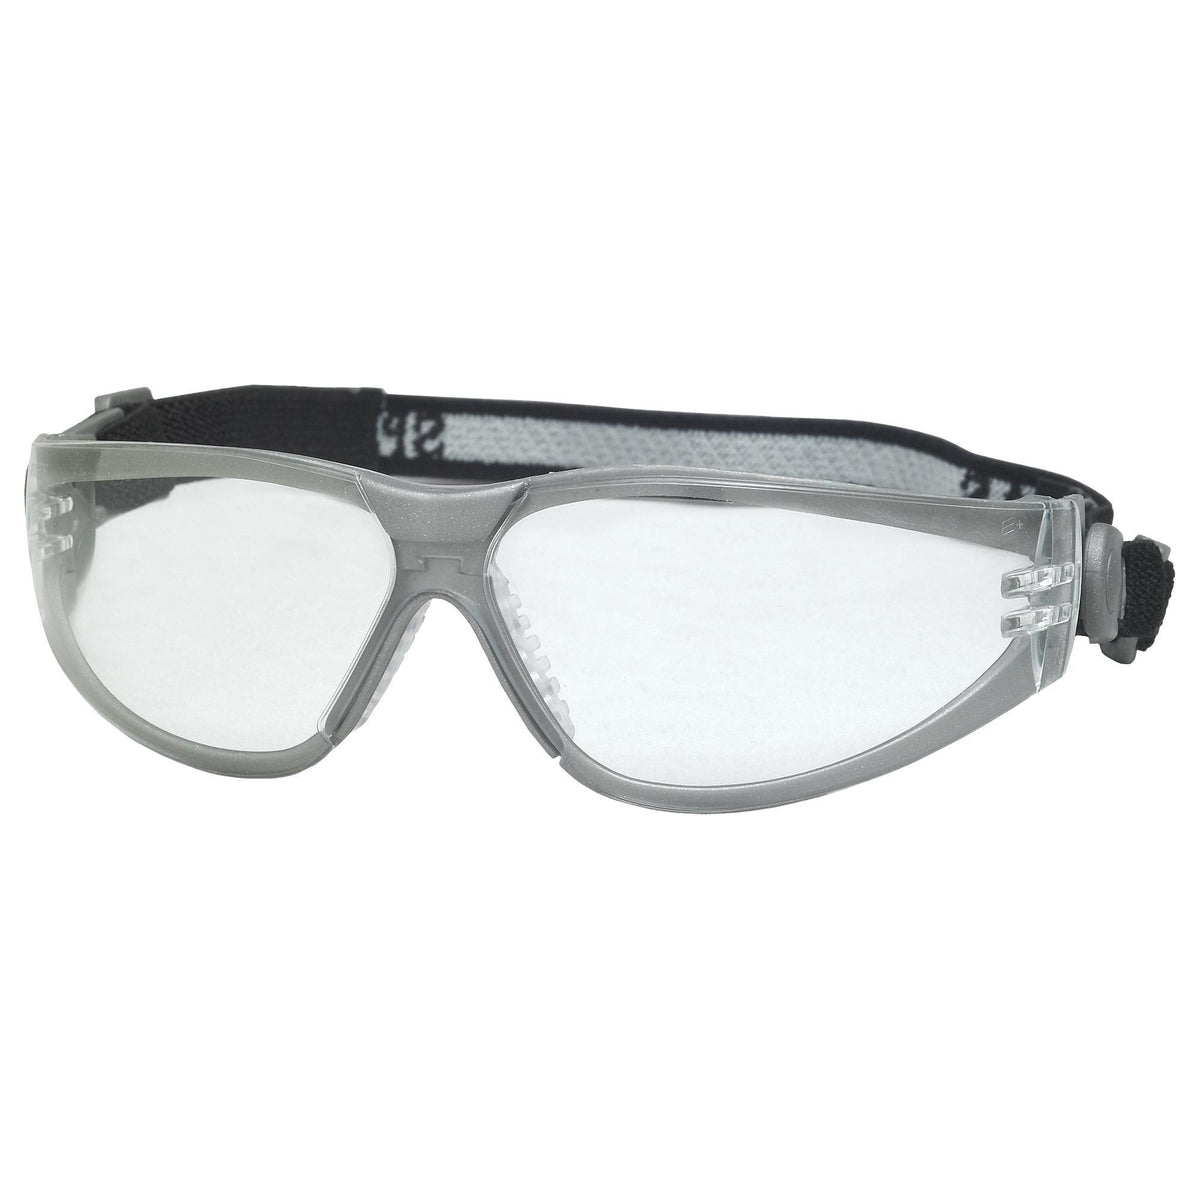 Sport BOAS® Safety Glasses with Anti-Fog Lens 1PC